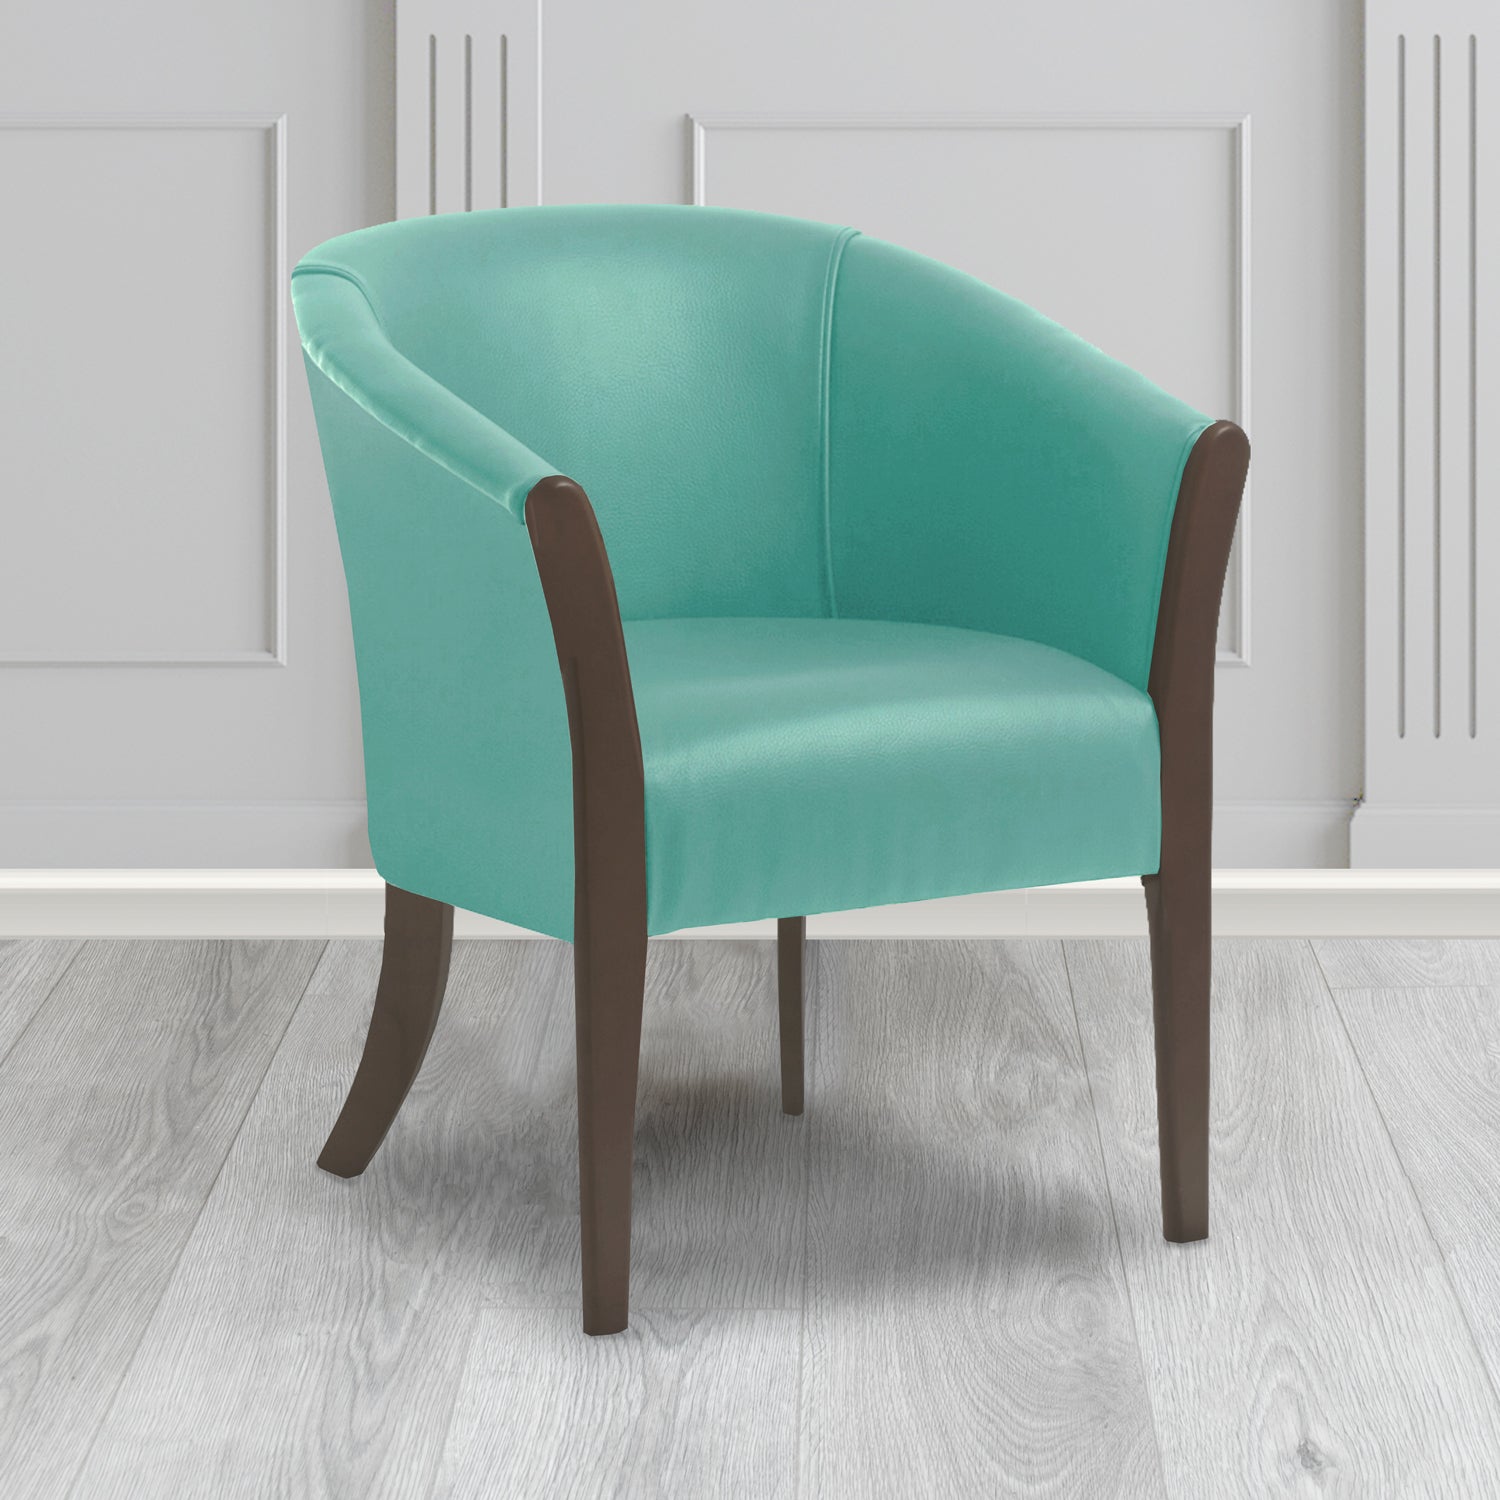 Hamilton Tub Chair in Agua Paint Pot Spearmint Crib 5 Faux Leather - Antimicrobial, Stain Resistant & Waterproof - The Tub Chair Shop